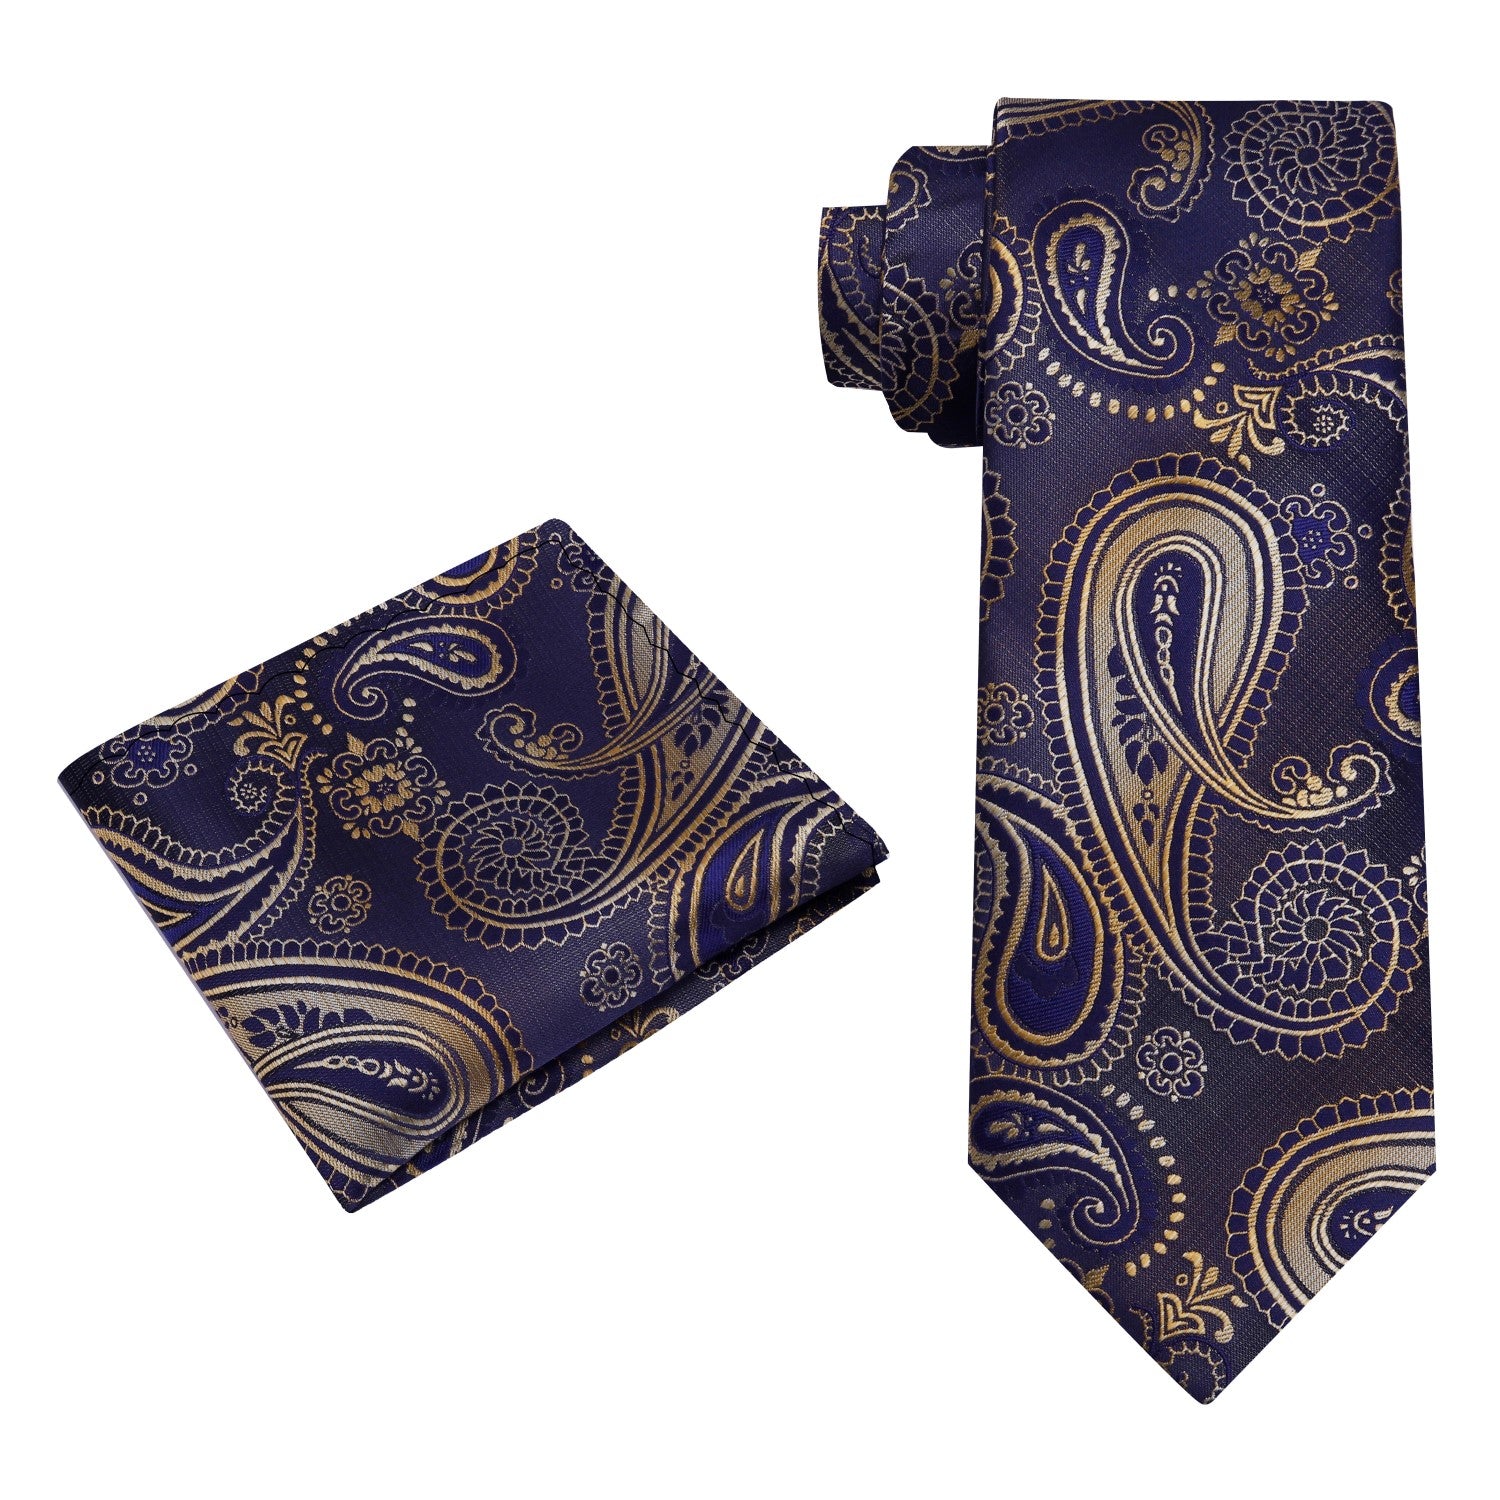 View 2B: blue gold paisley tie and pocket square||Navy, Gold